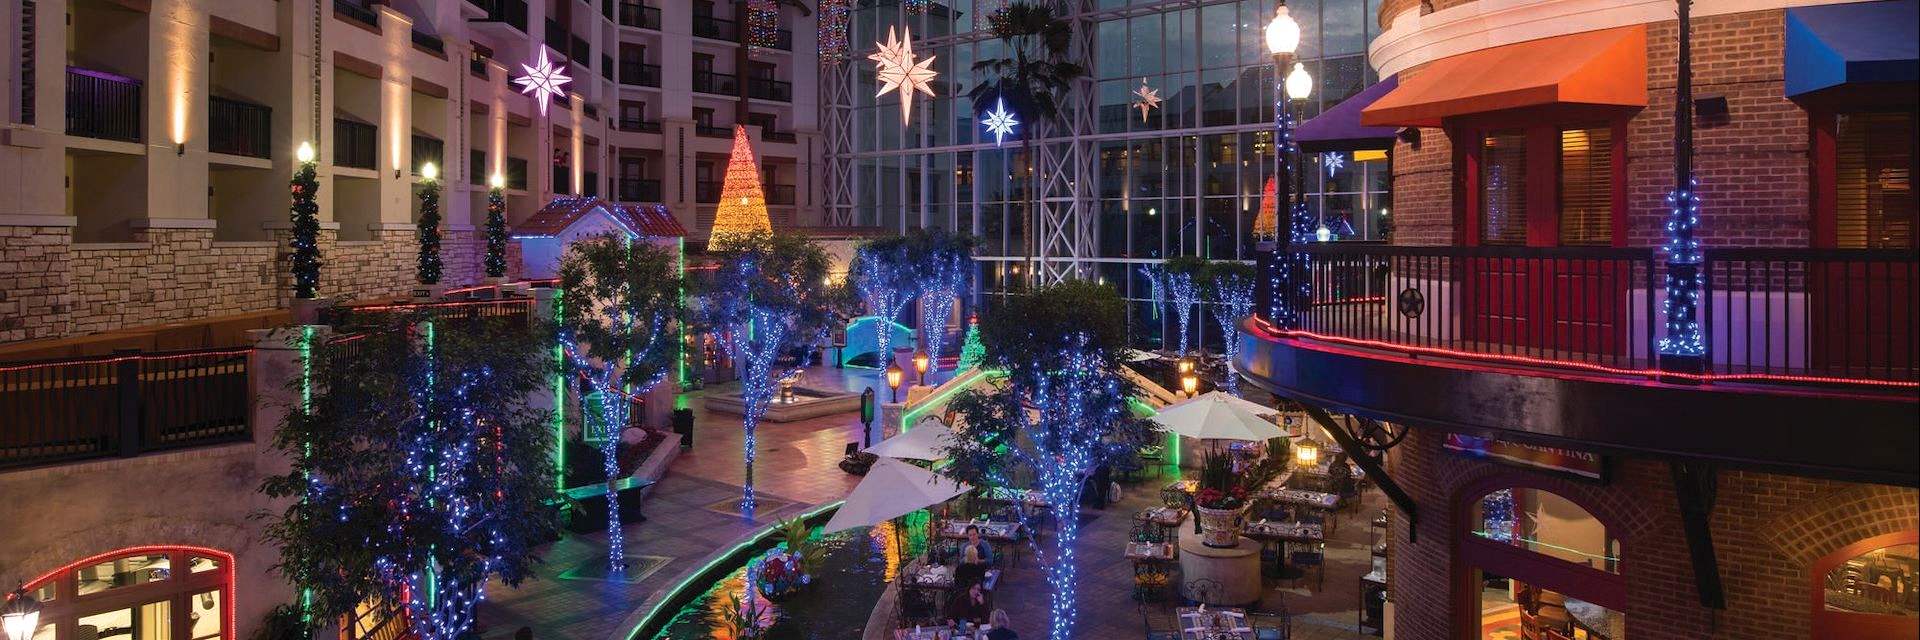 Offers at Christmas Gaylord Texan